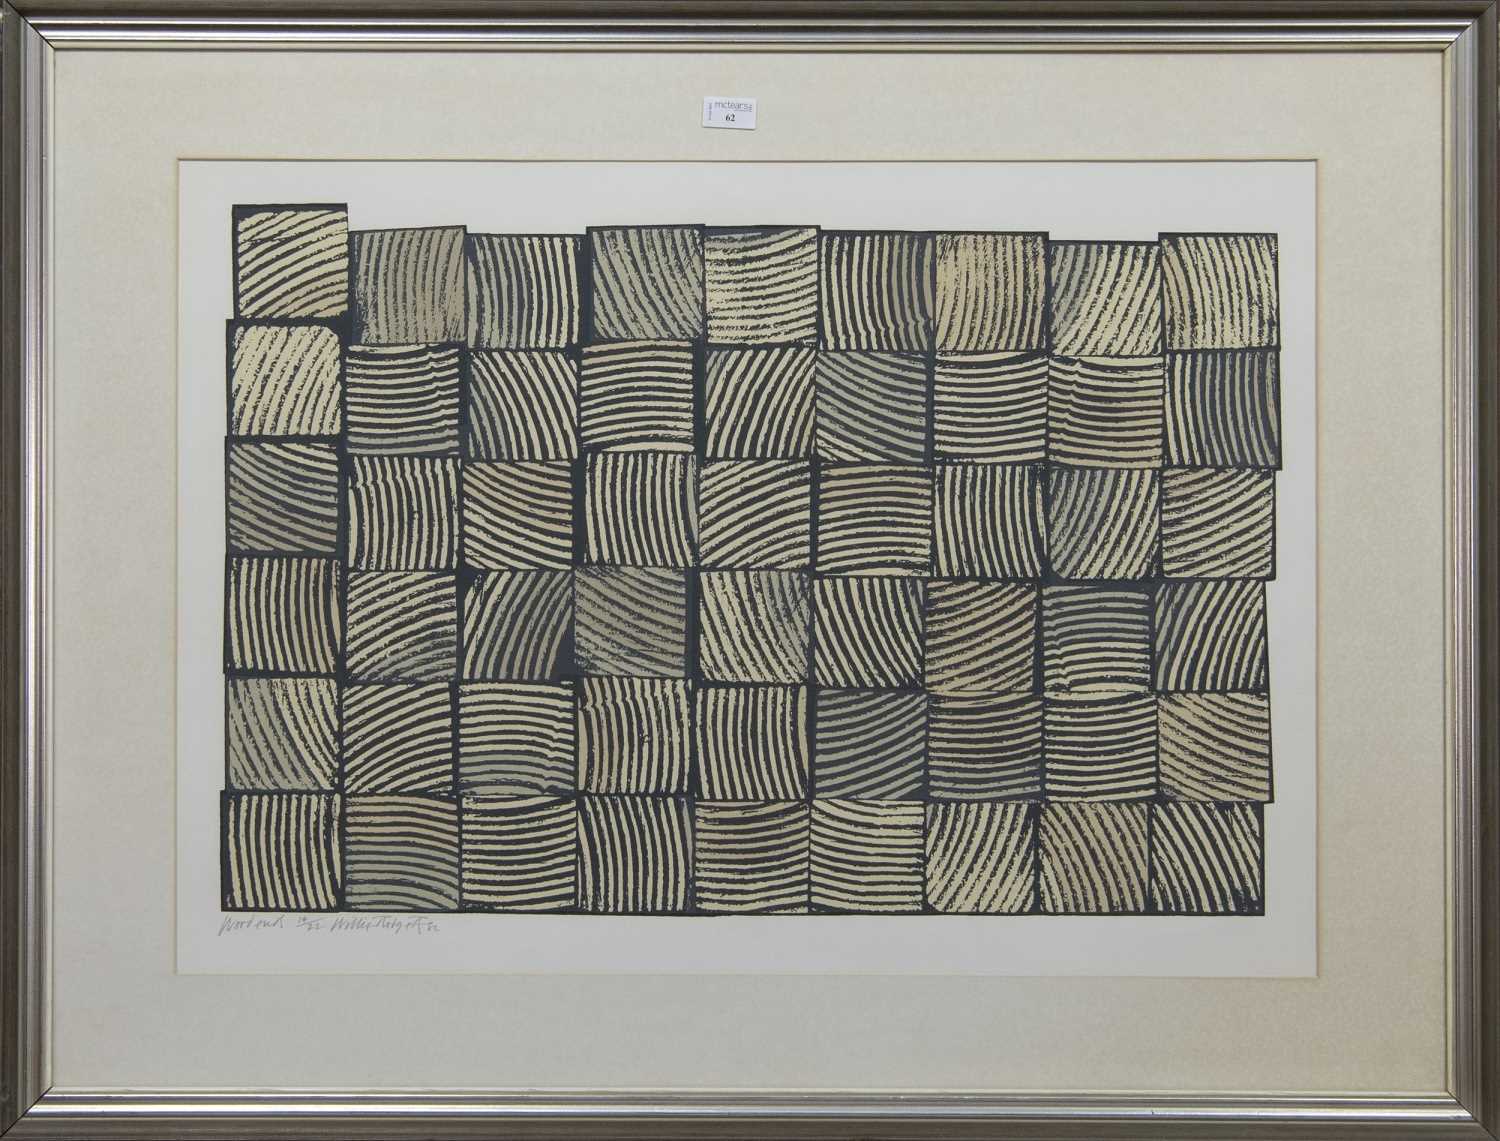 Lot 62 - WOOD ENDS, A SIGNED LIMITED EDITION WOODCUT BY WILLIE RODGER